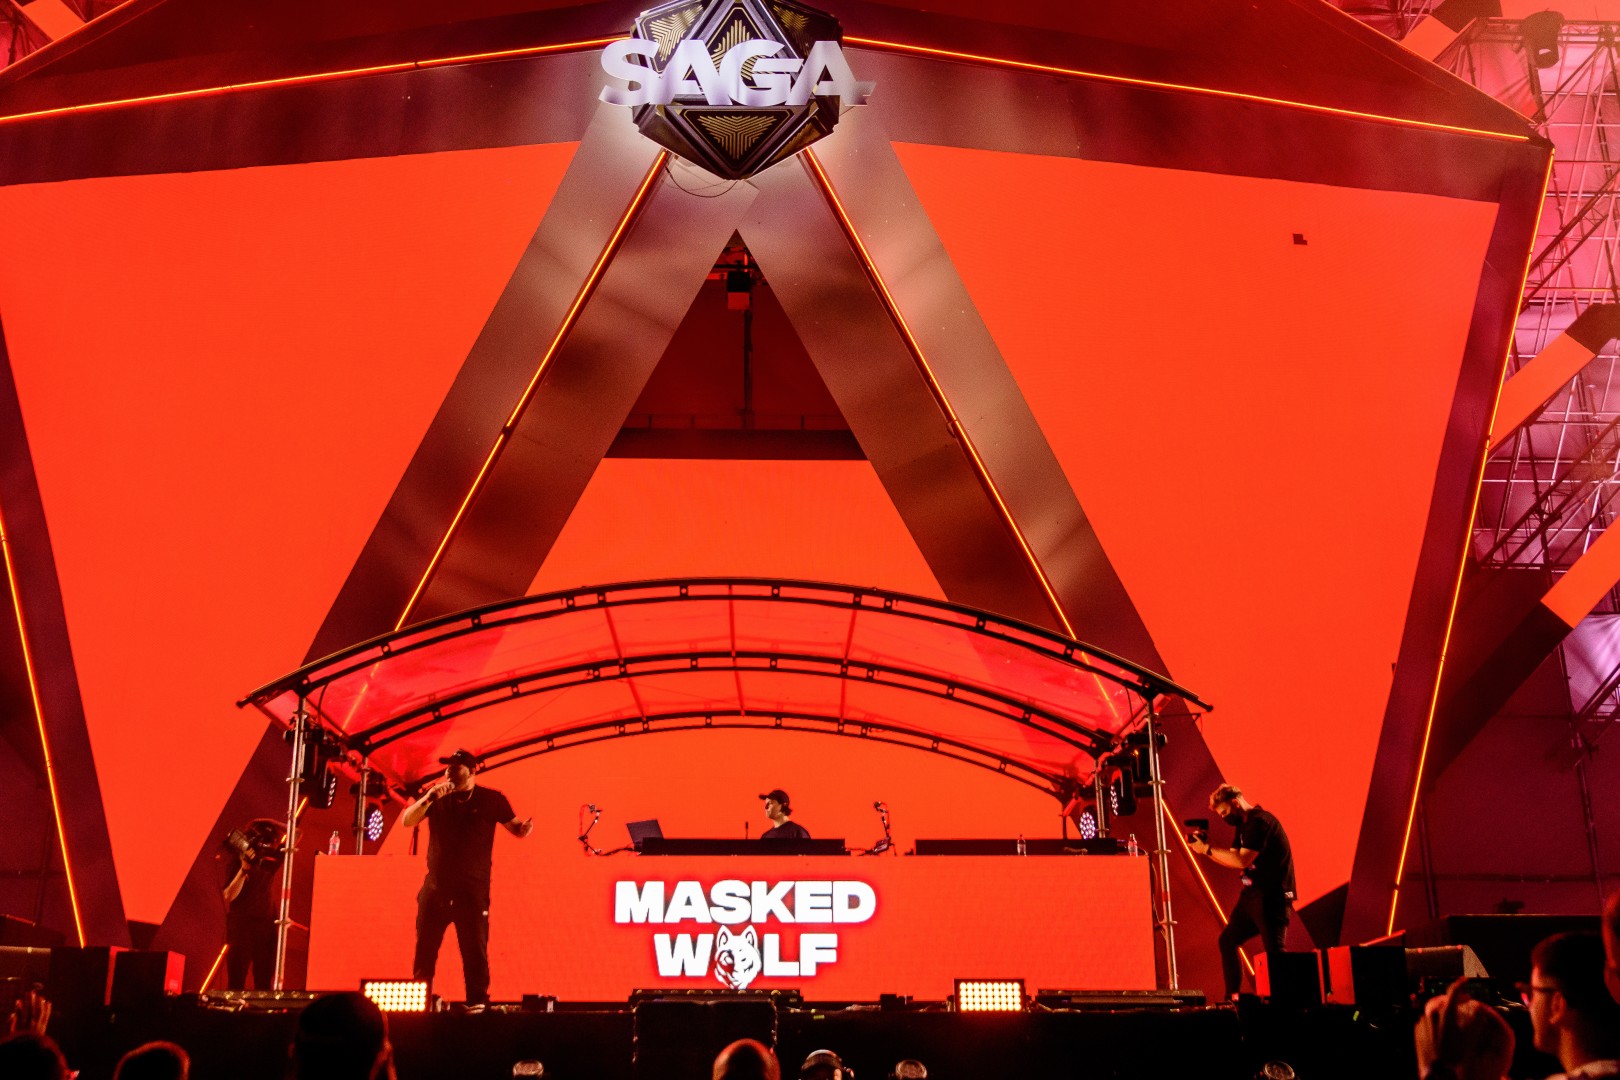 Masked Wolf at Romaero in Bucharest on September 12, 2021 (f8ea20bf63)